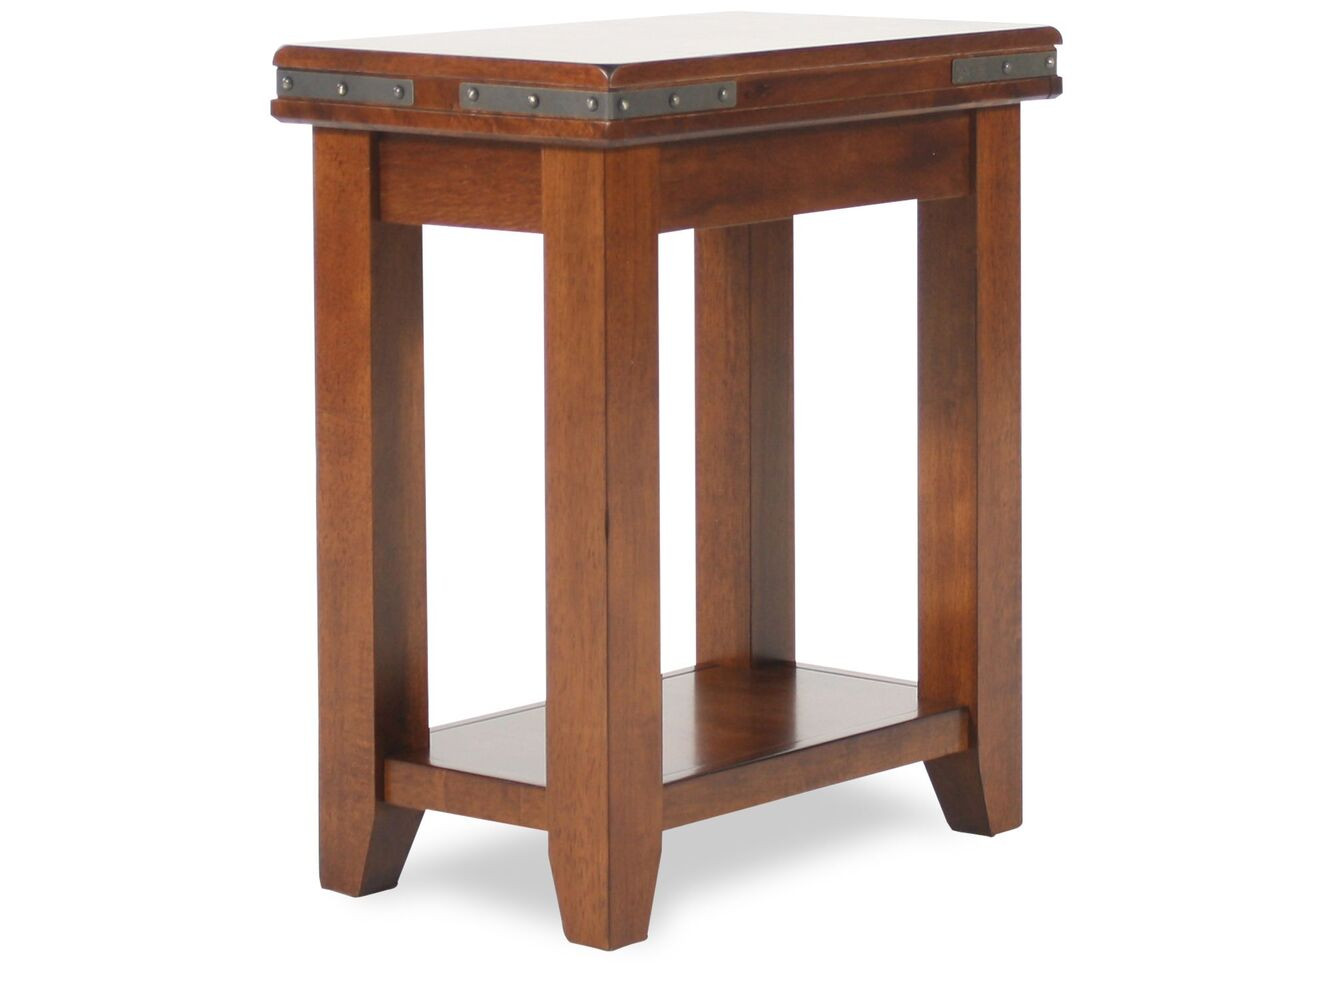 Small Bedroom End Tables
 Round Small Traditional End Table in Warm Brown